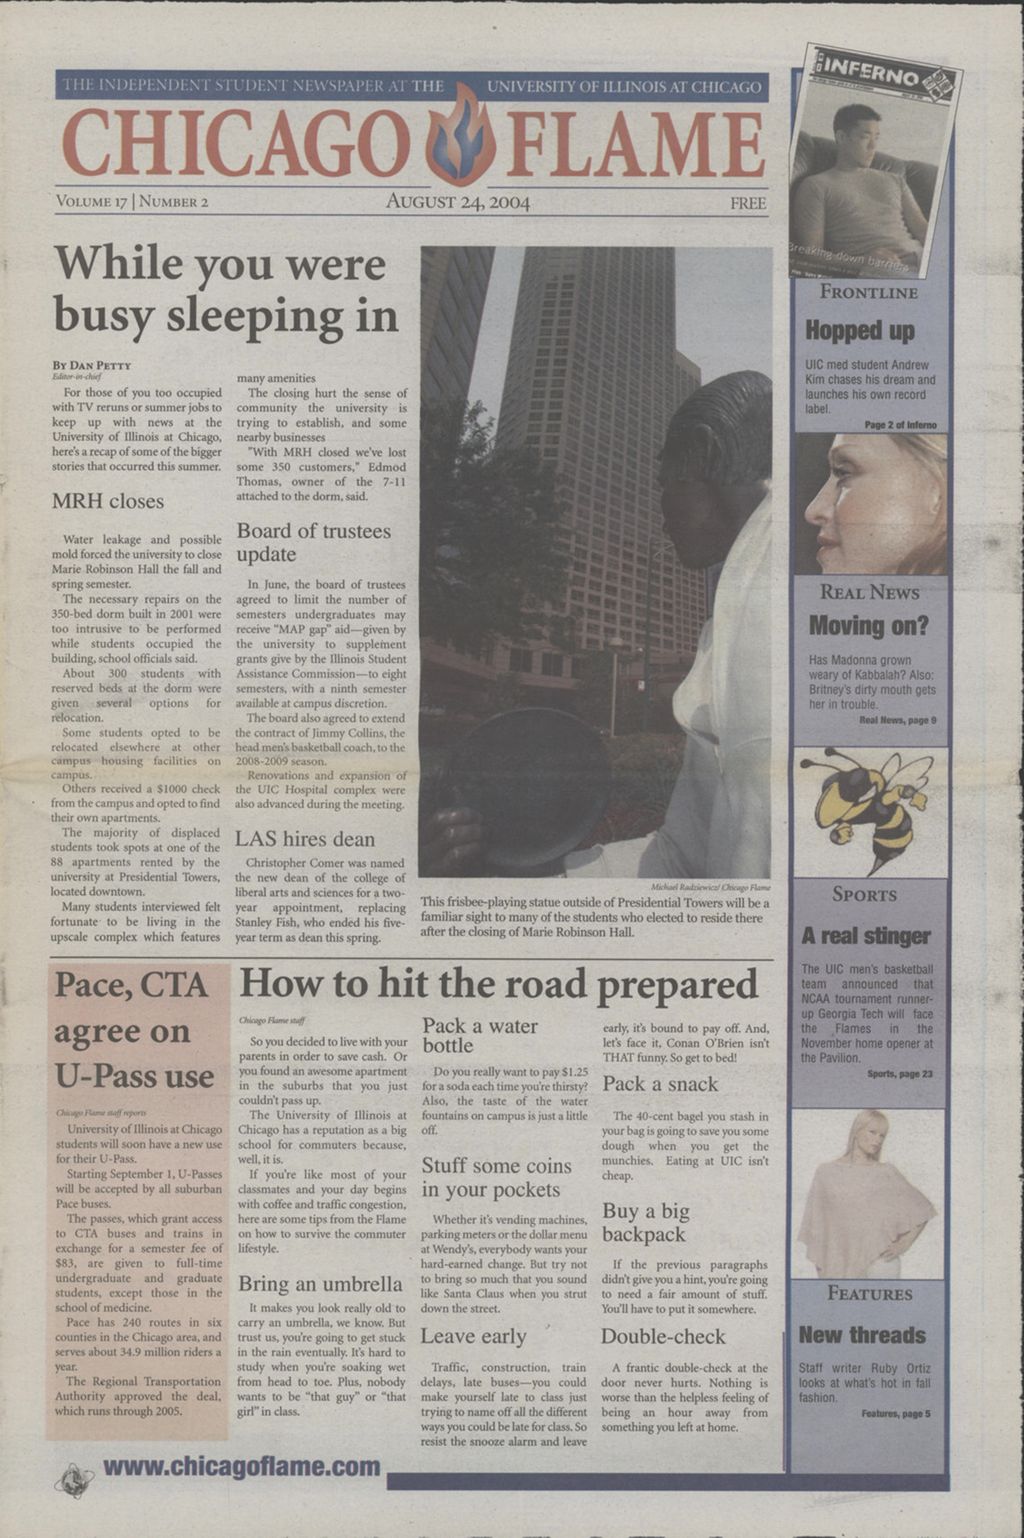 Chicago Flame (August 24, 2004)